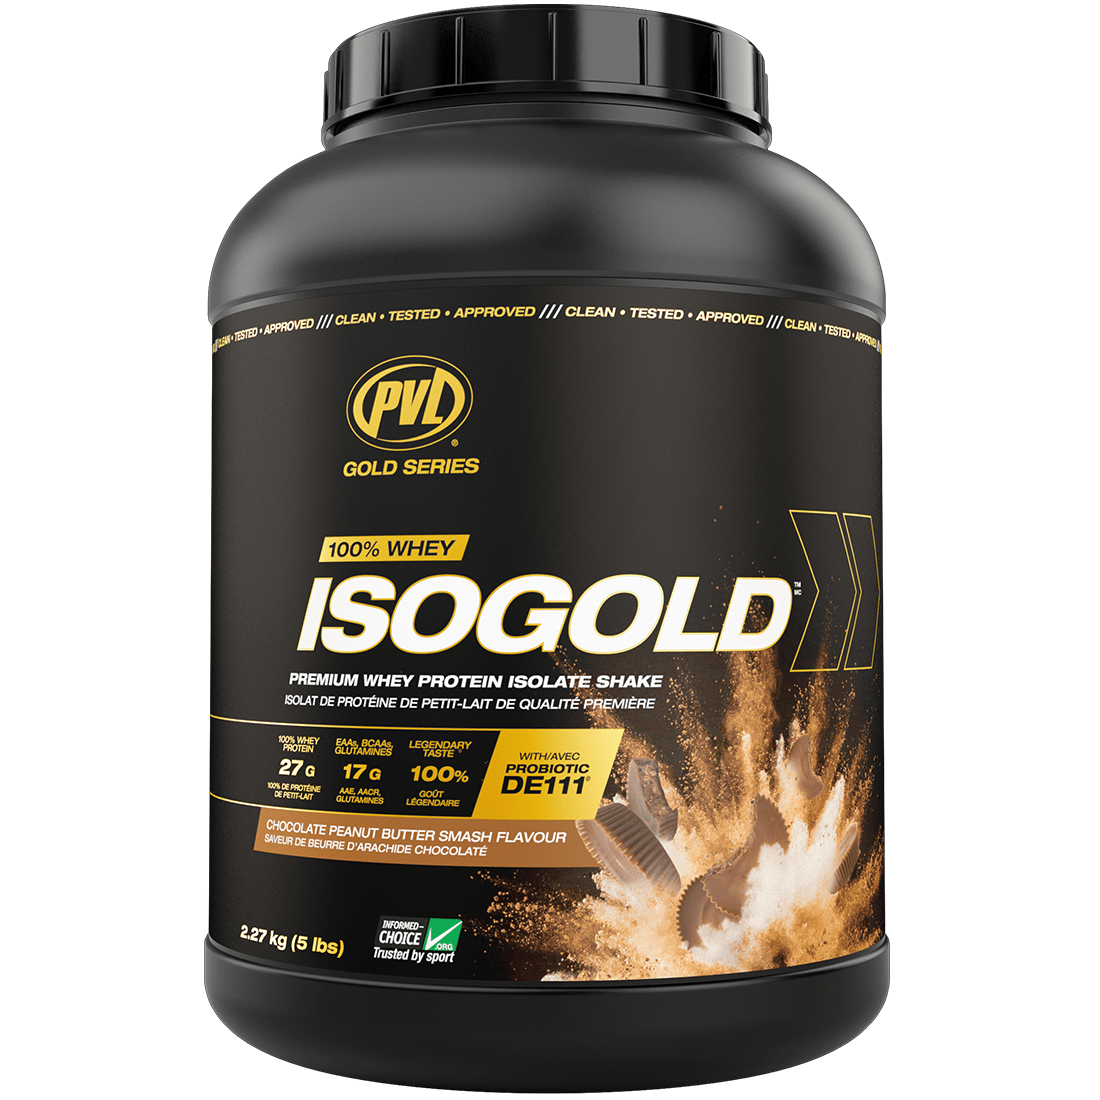 https://cdn.shopify.com/s/files/1/0621/4126/8139/products/PVL-Iso-Gold-Whey-Protein-Isolates-5lb-227kg-Chocolate-Peanut-Butter-Smash_3cb92837-959d-435b-b9db-9a2bc6ee935f.png?v=1686135077&width=2000